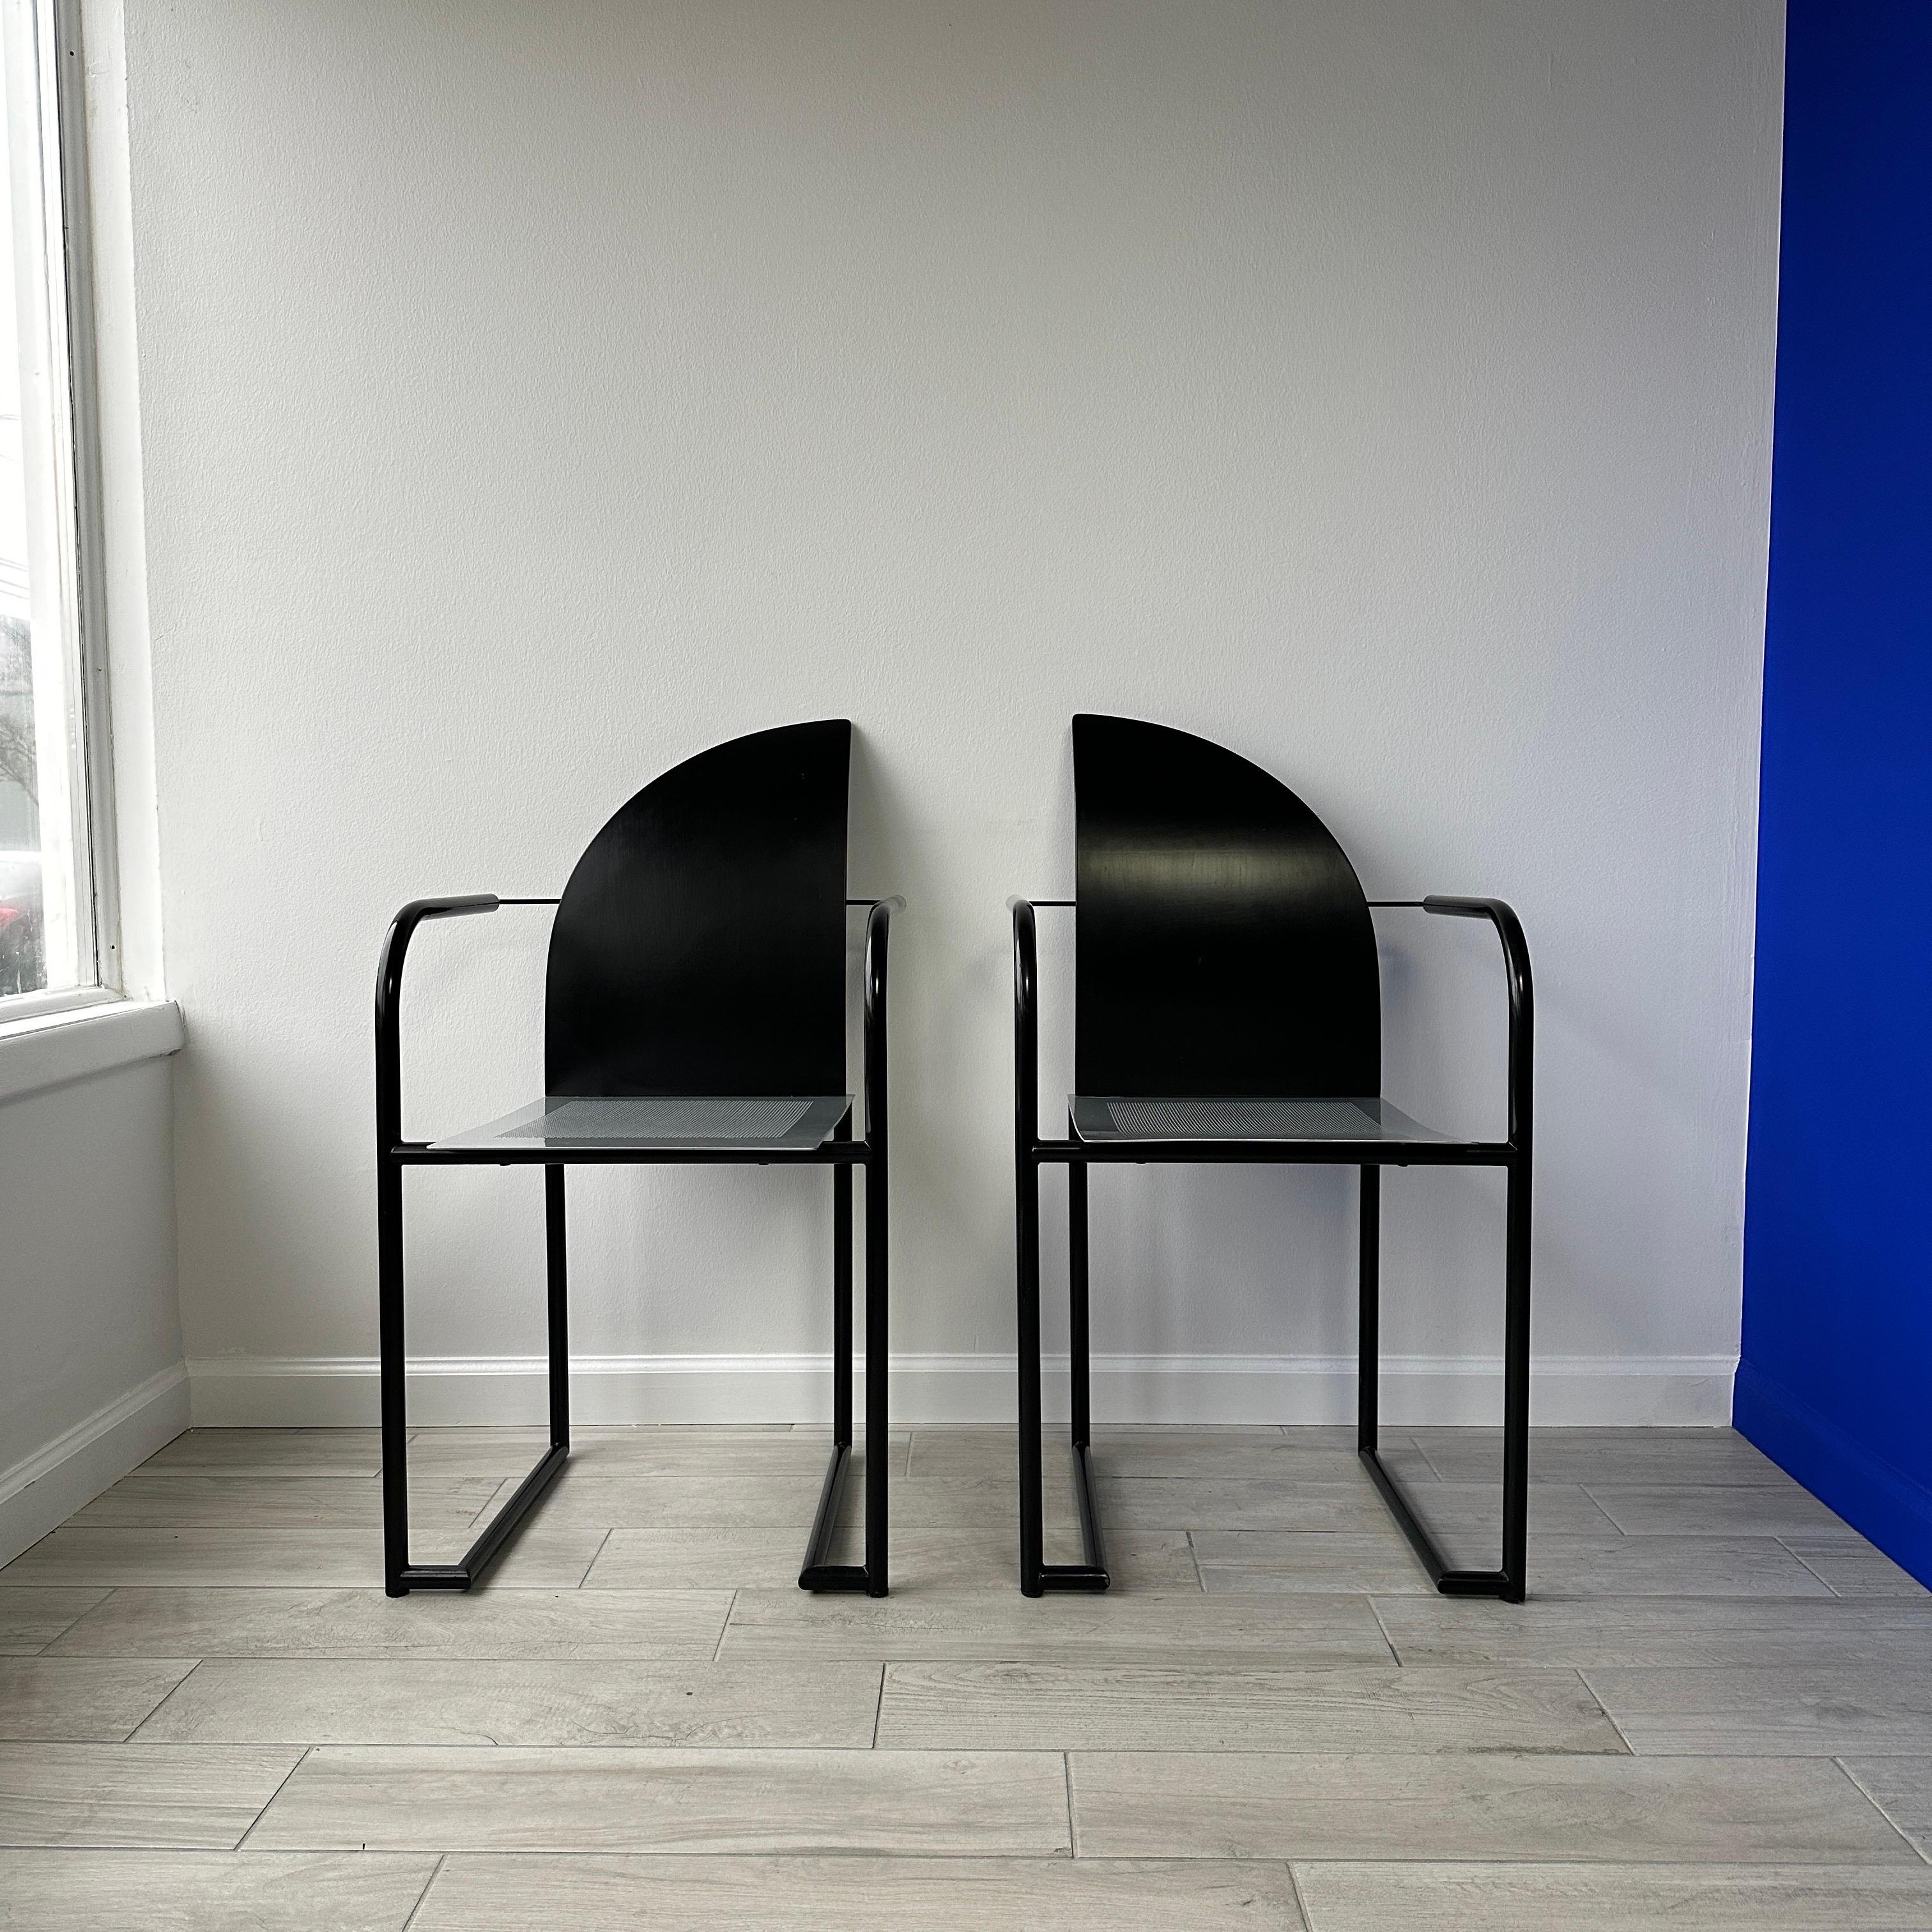 Vintage circa 1980s postmodern side chairs. Made of perforated metal seat with black metal tubing and a curved wood back. In the style of Karl Friedrich Förster 'KFF' or Mario Botta. Originally purchased for a loft space in the 1980s and a rare